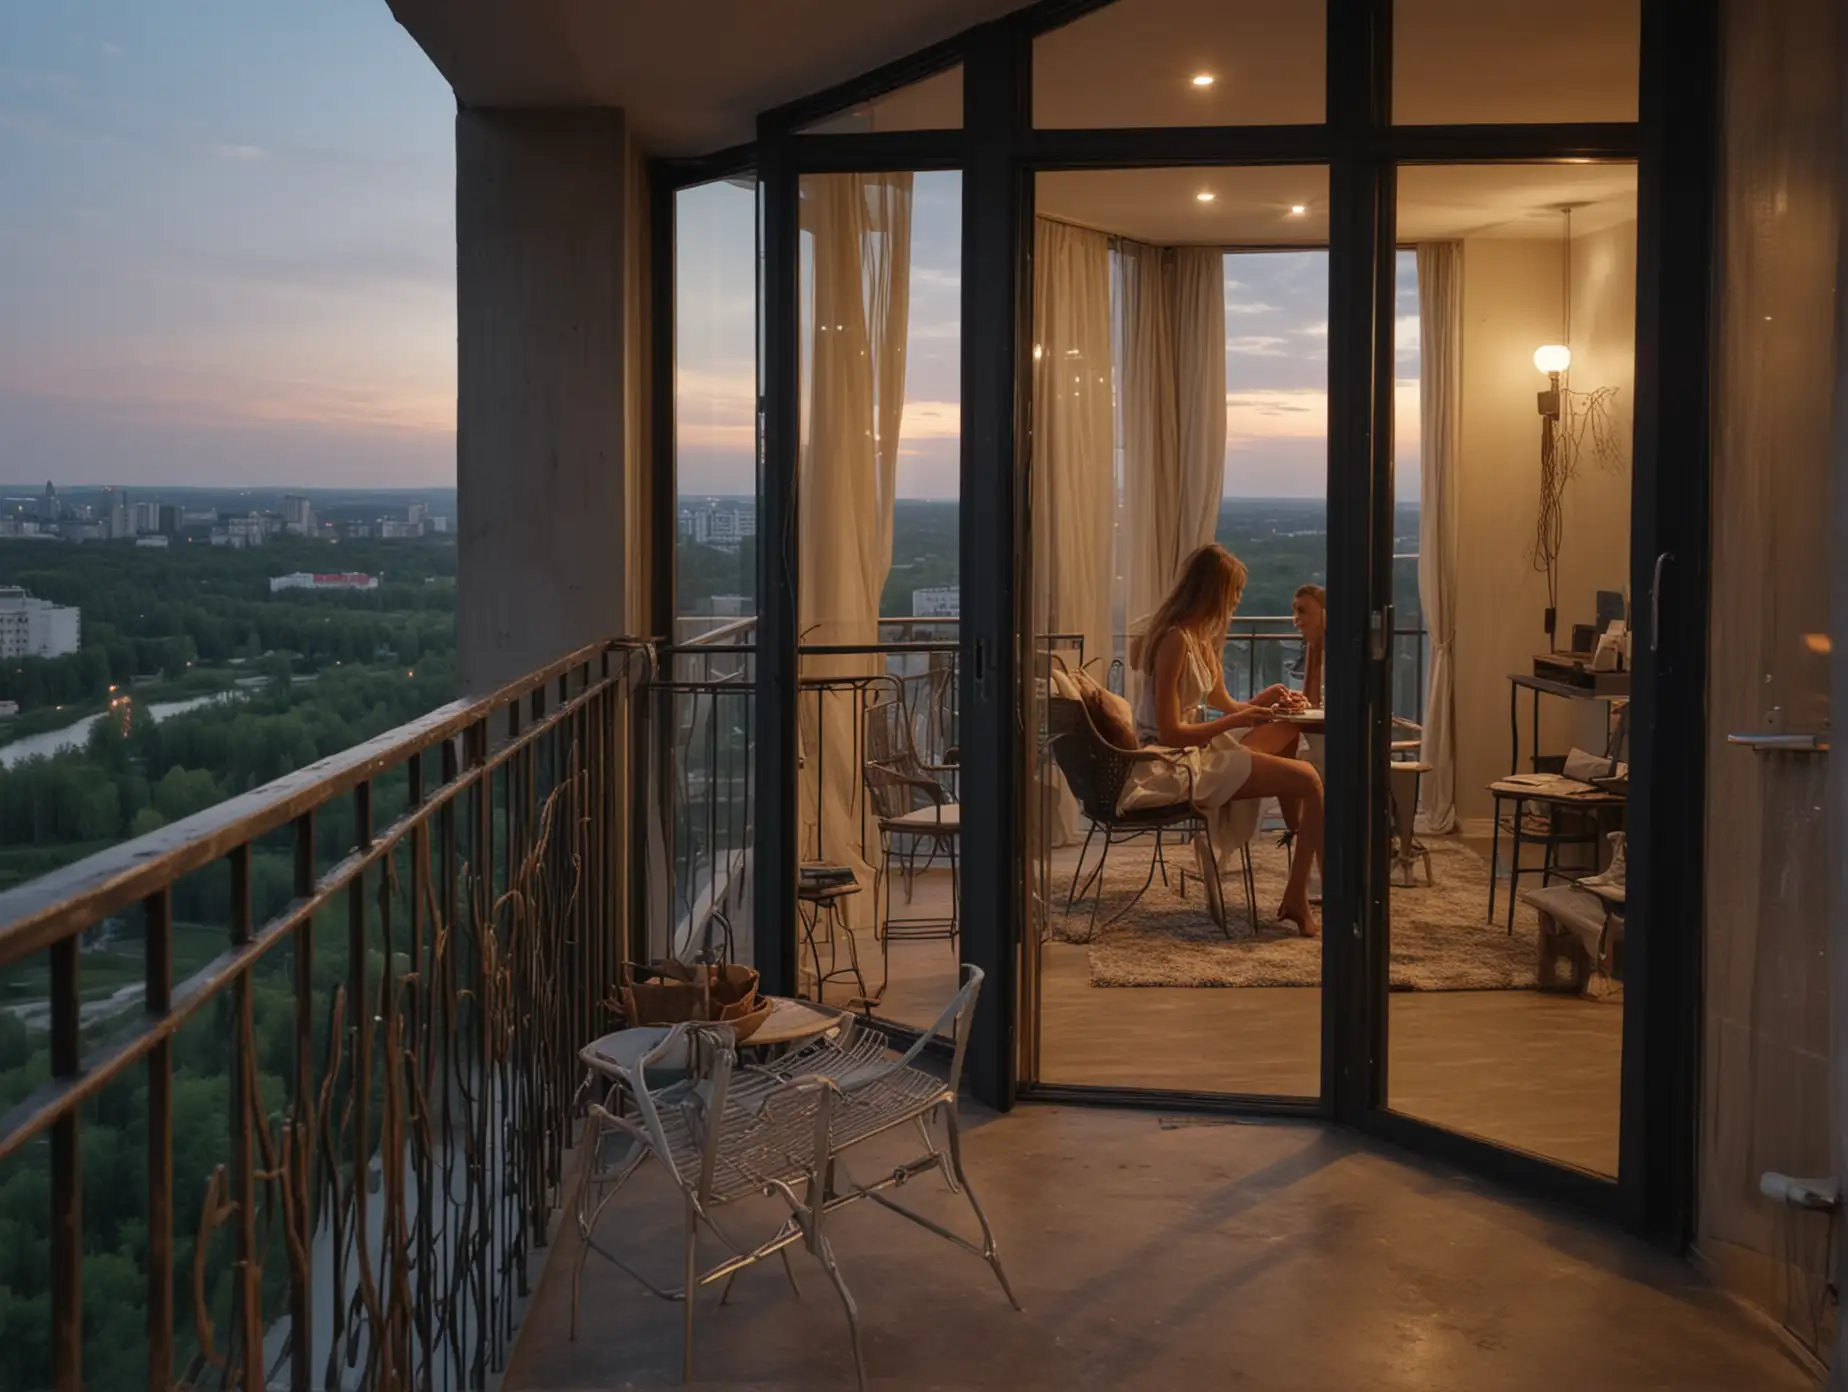 Fashionable-Girl-Contemplating-Riverside-View-from-Penthouse-Balcony-at-Dusk